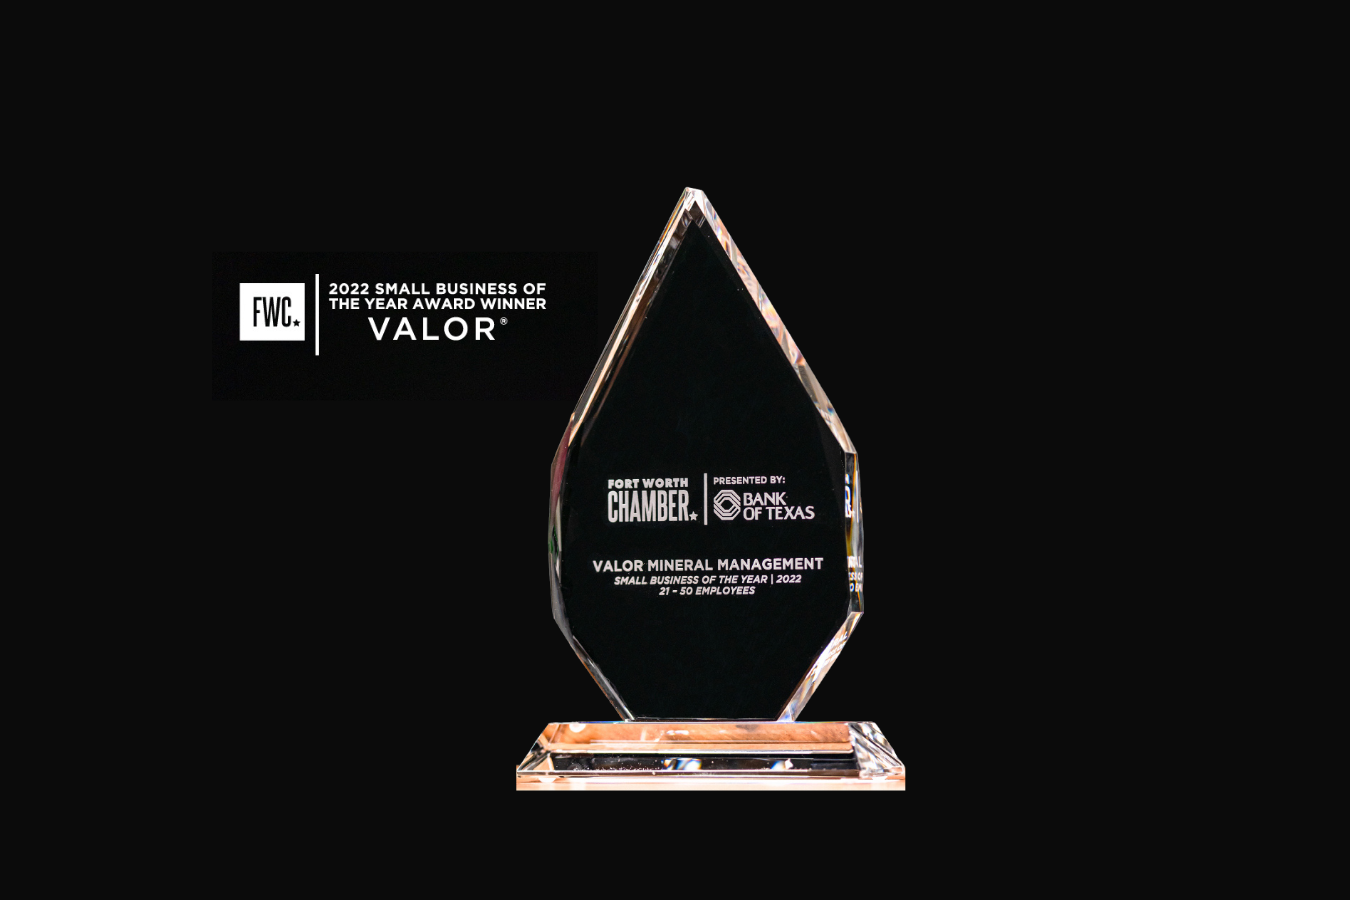 Valor Named Fort Worth Chamber “Small Business of the Year”